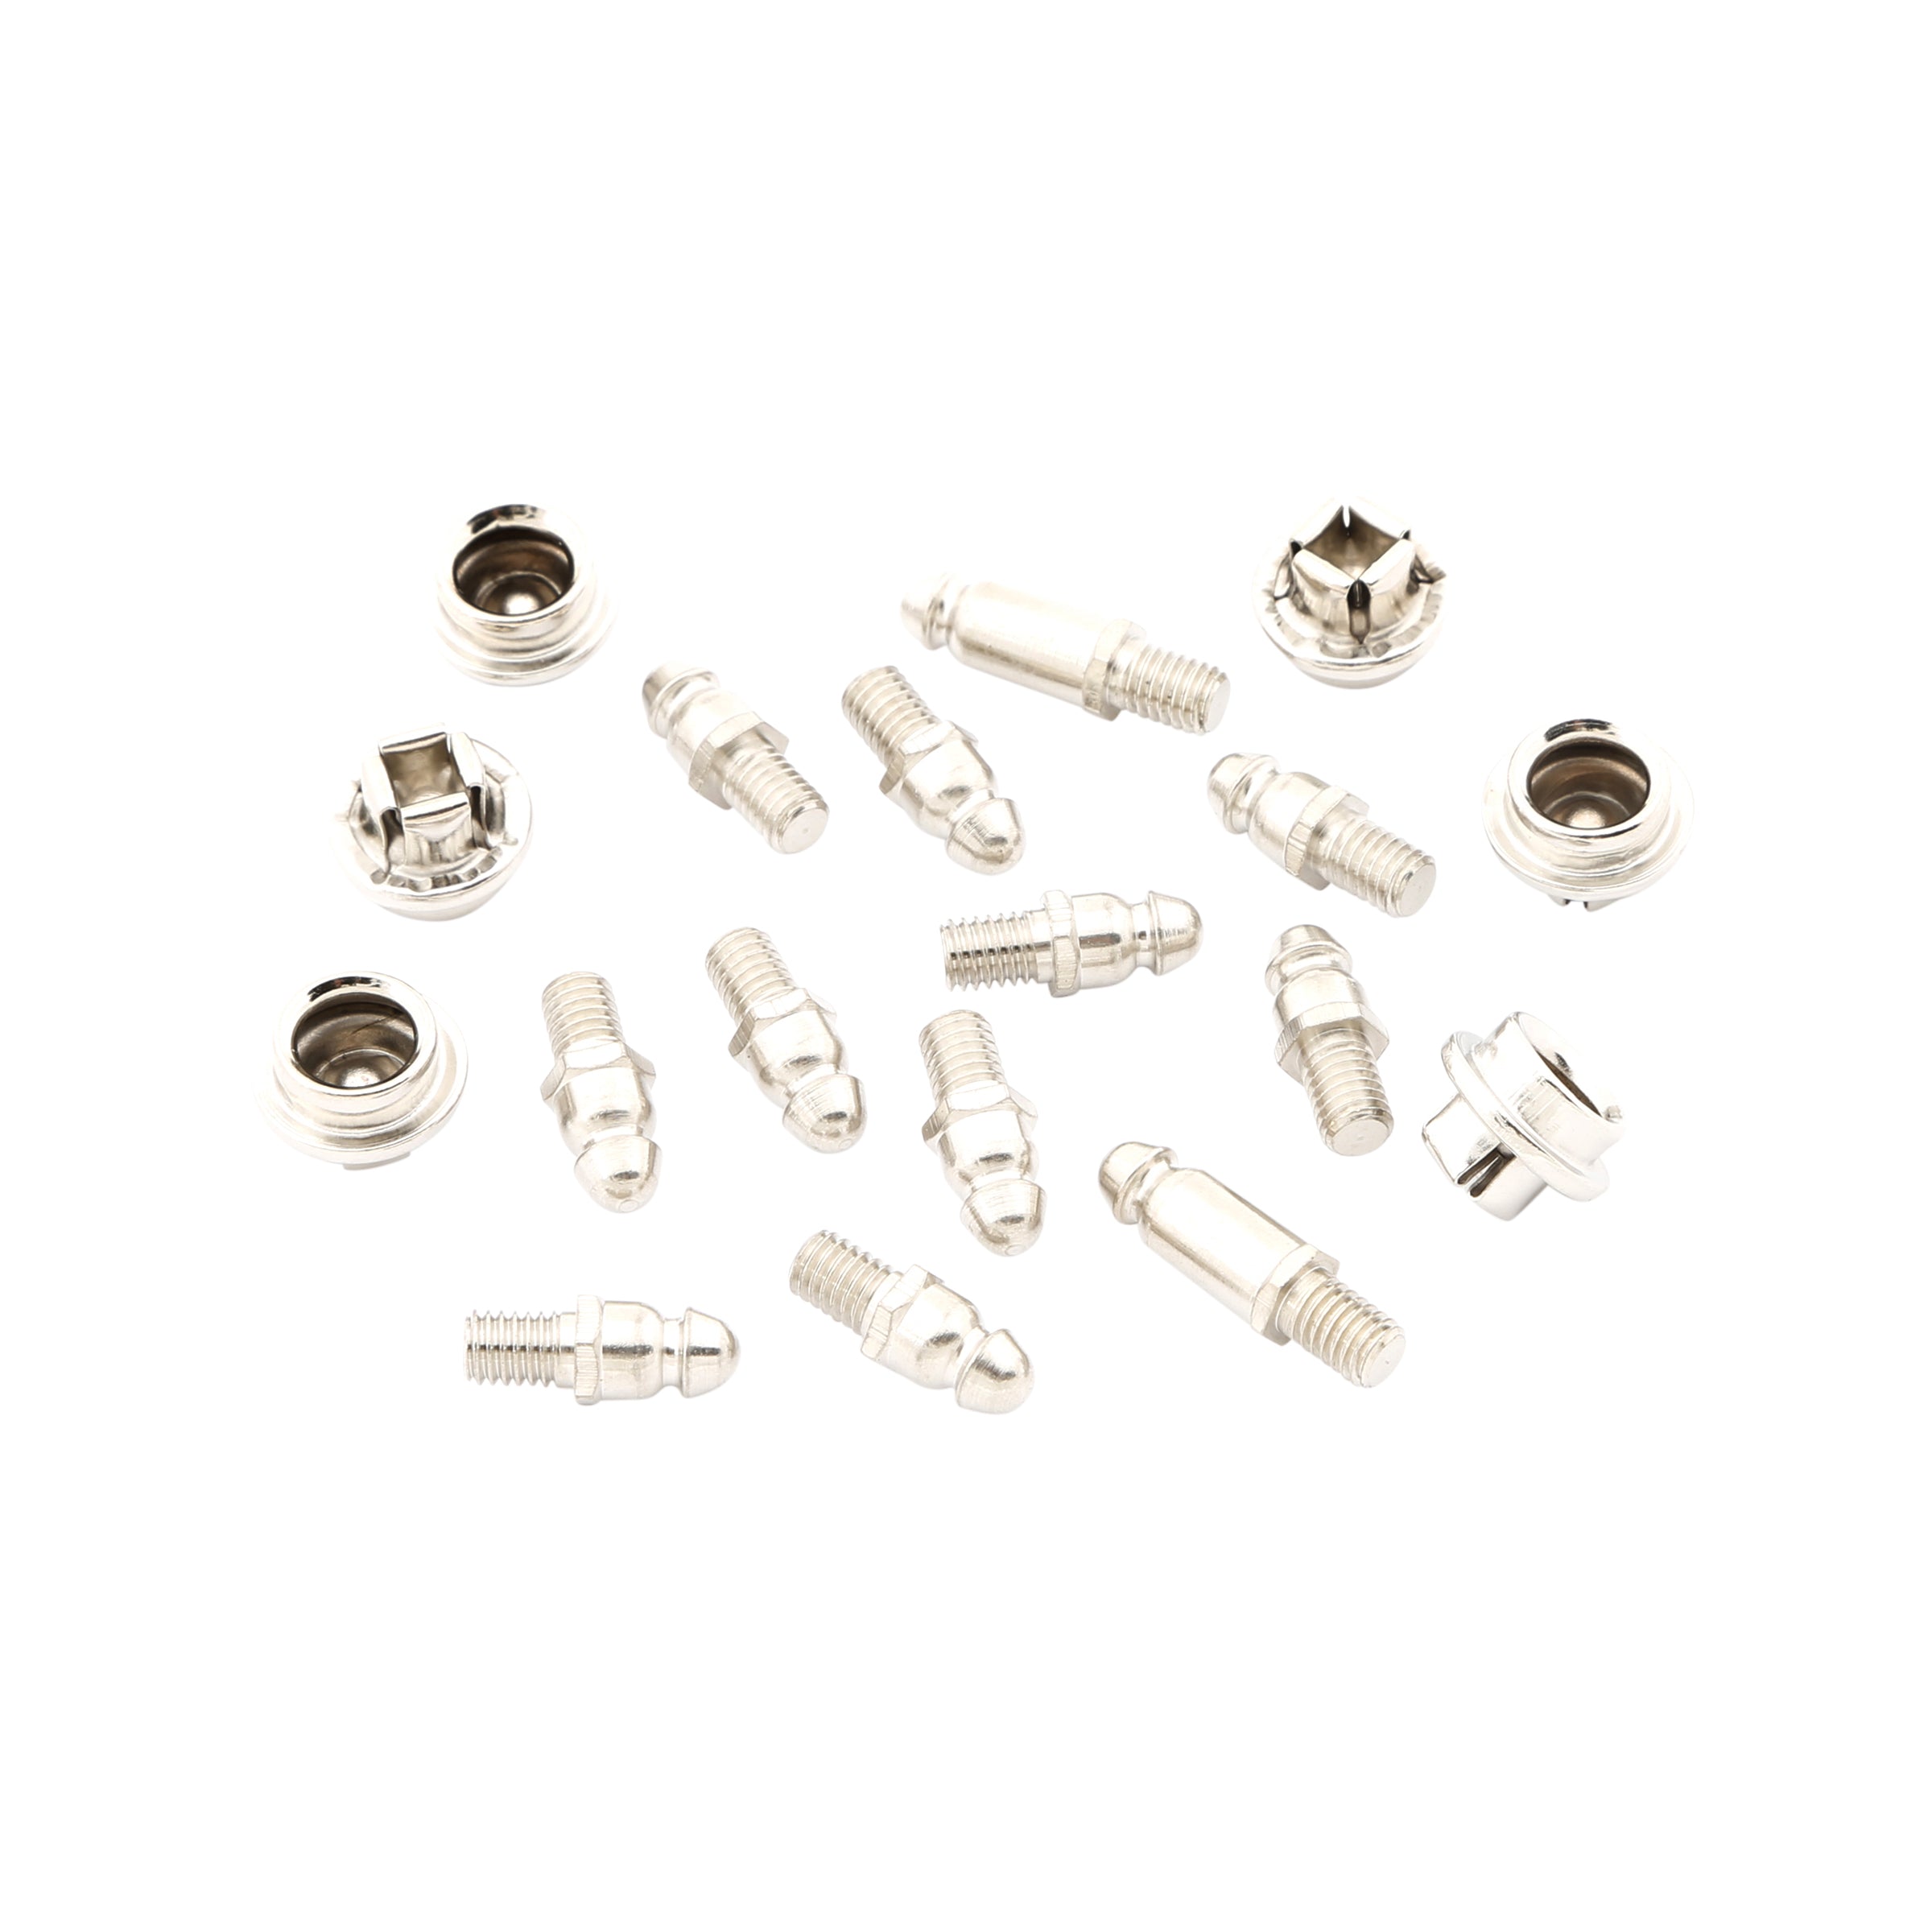 Windshield Post Curtain Studs • 1928-31 Model A Ford Open Car